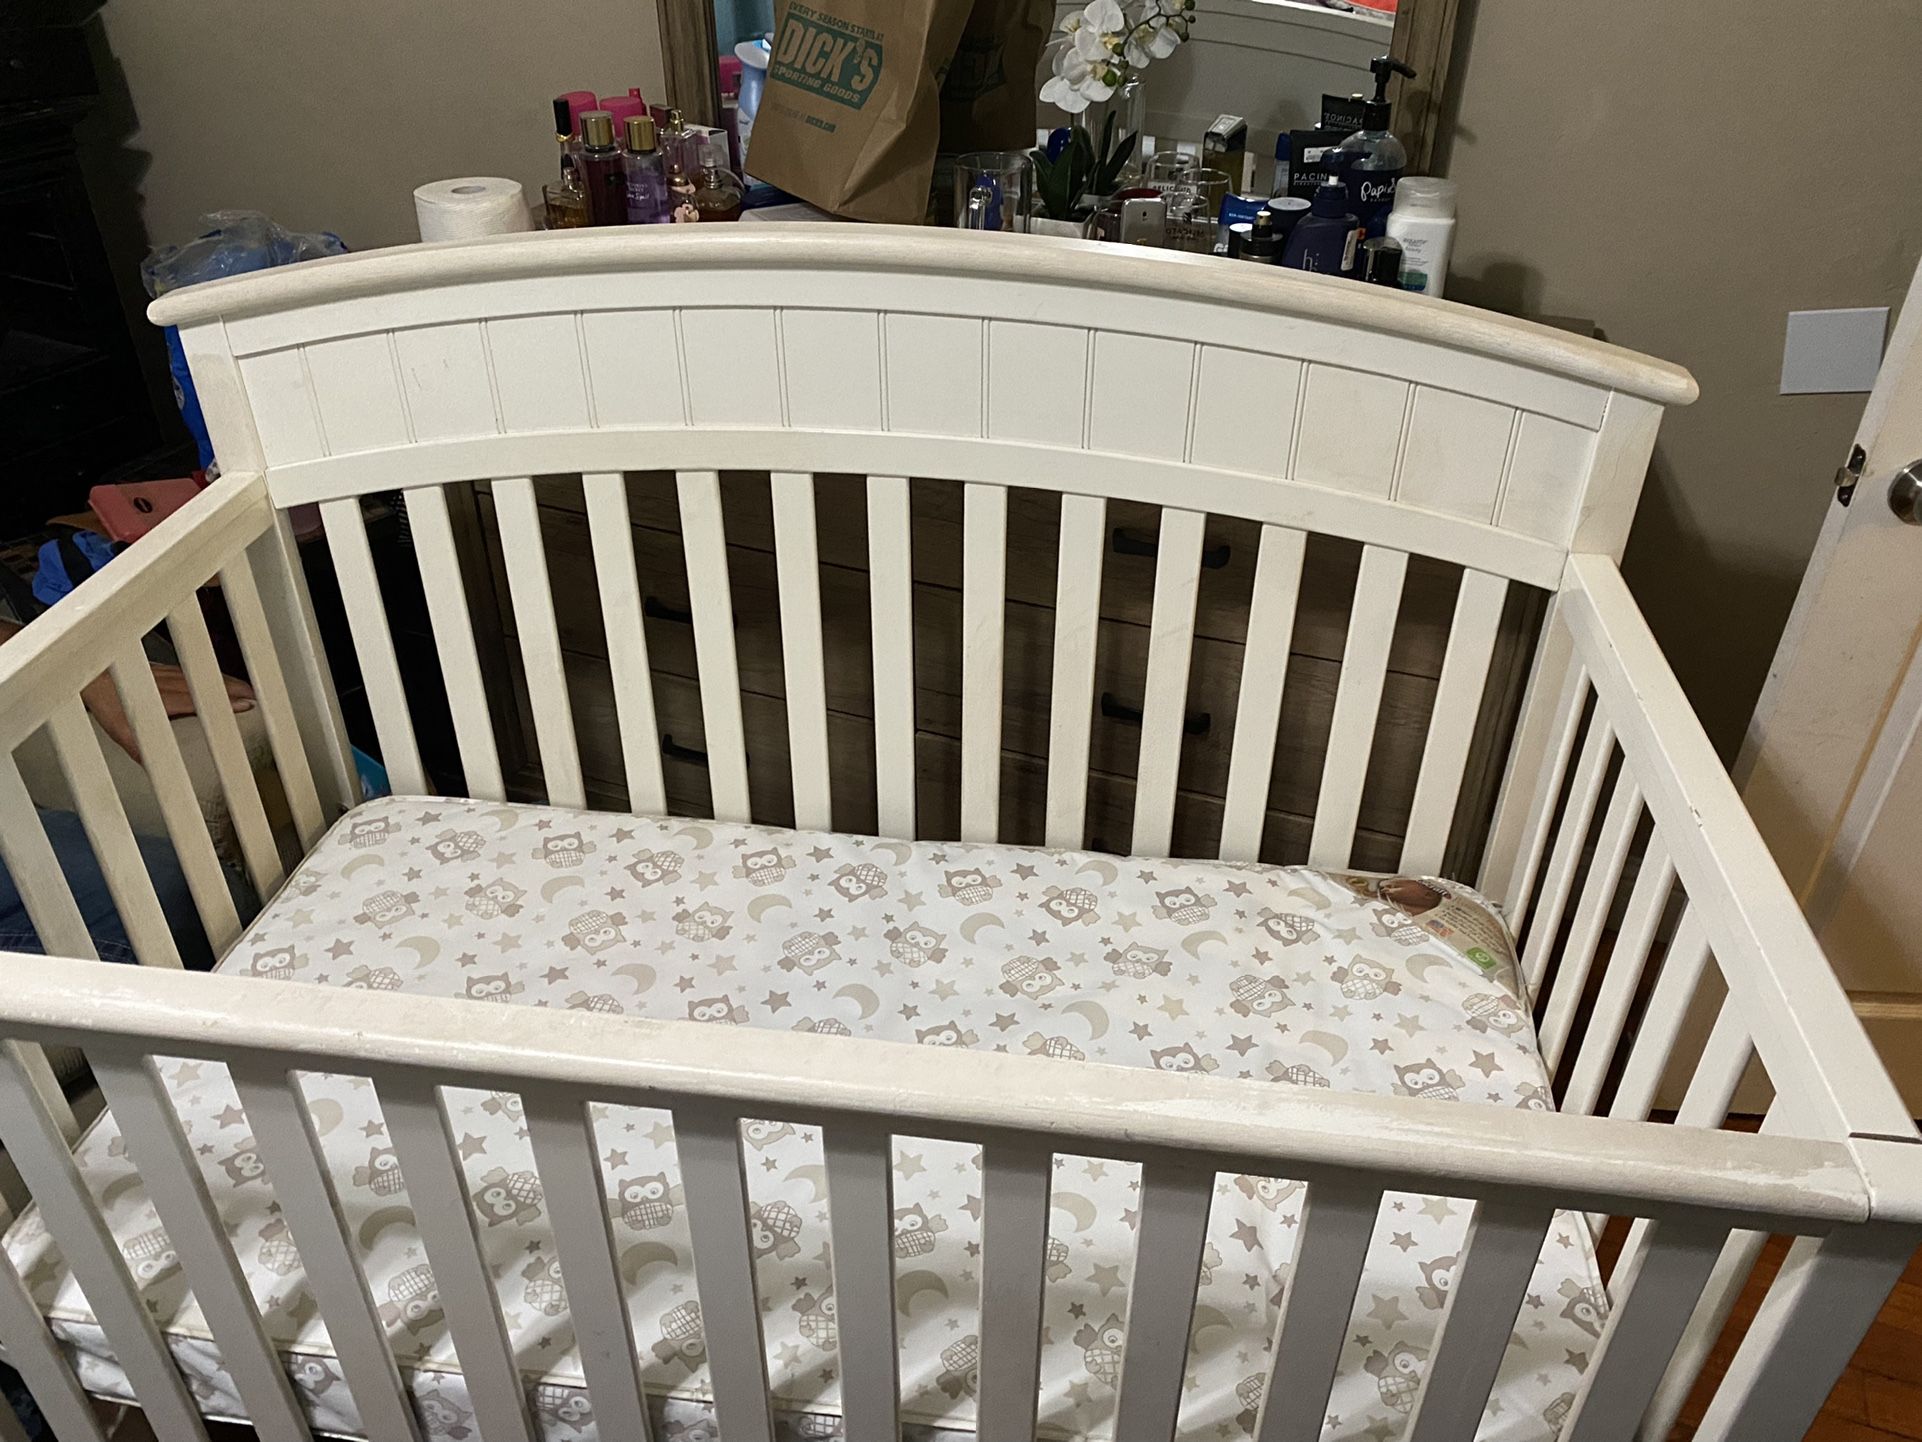 Free  Crib  With Matters  Works Good  